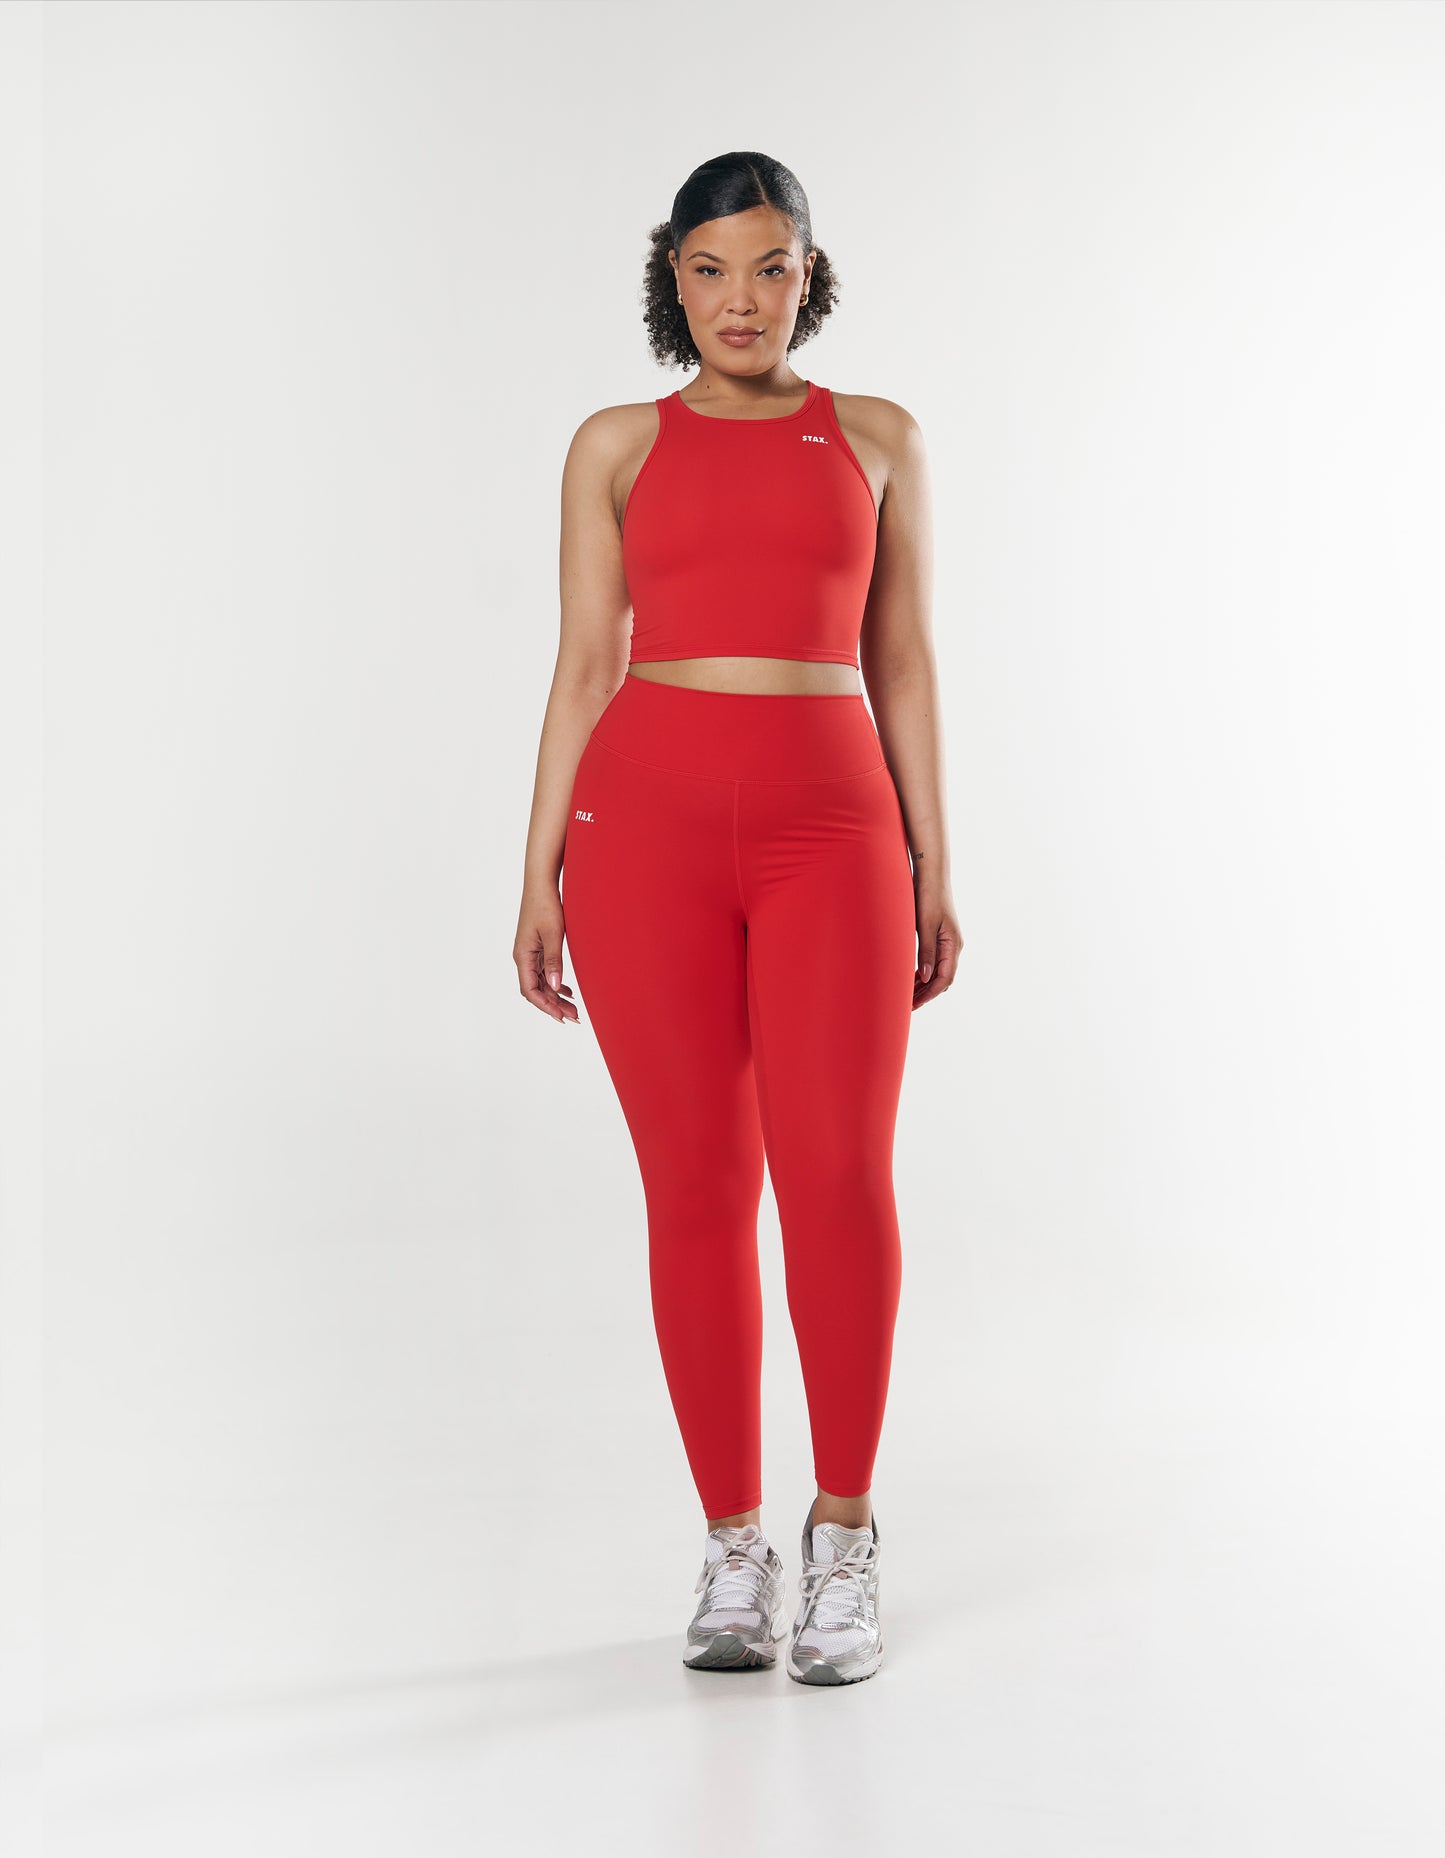 STAX. Cropped Tank NANDEX ™ -  Red